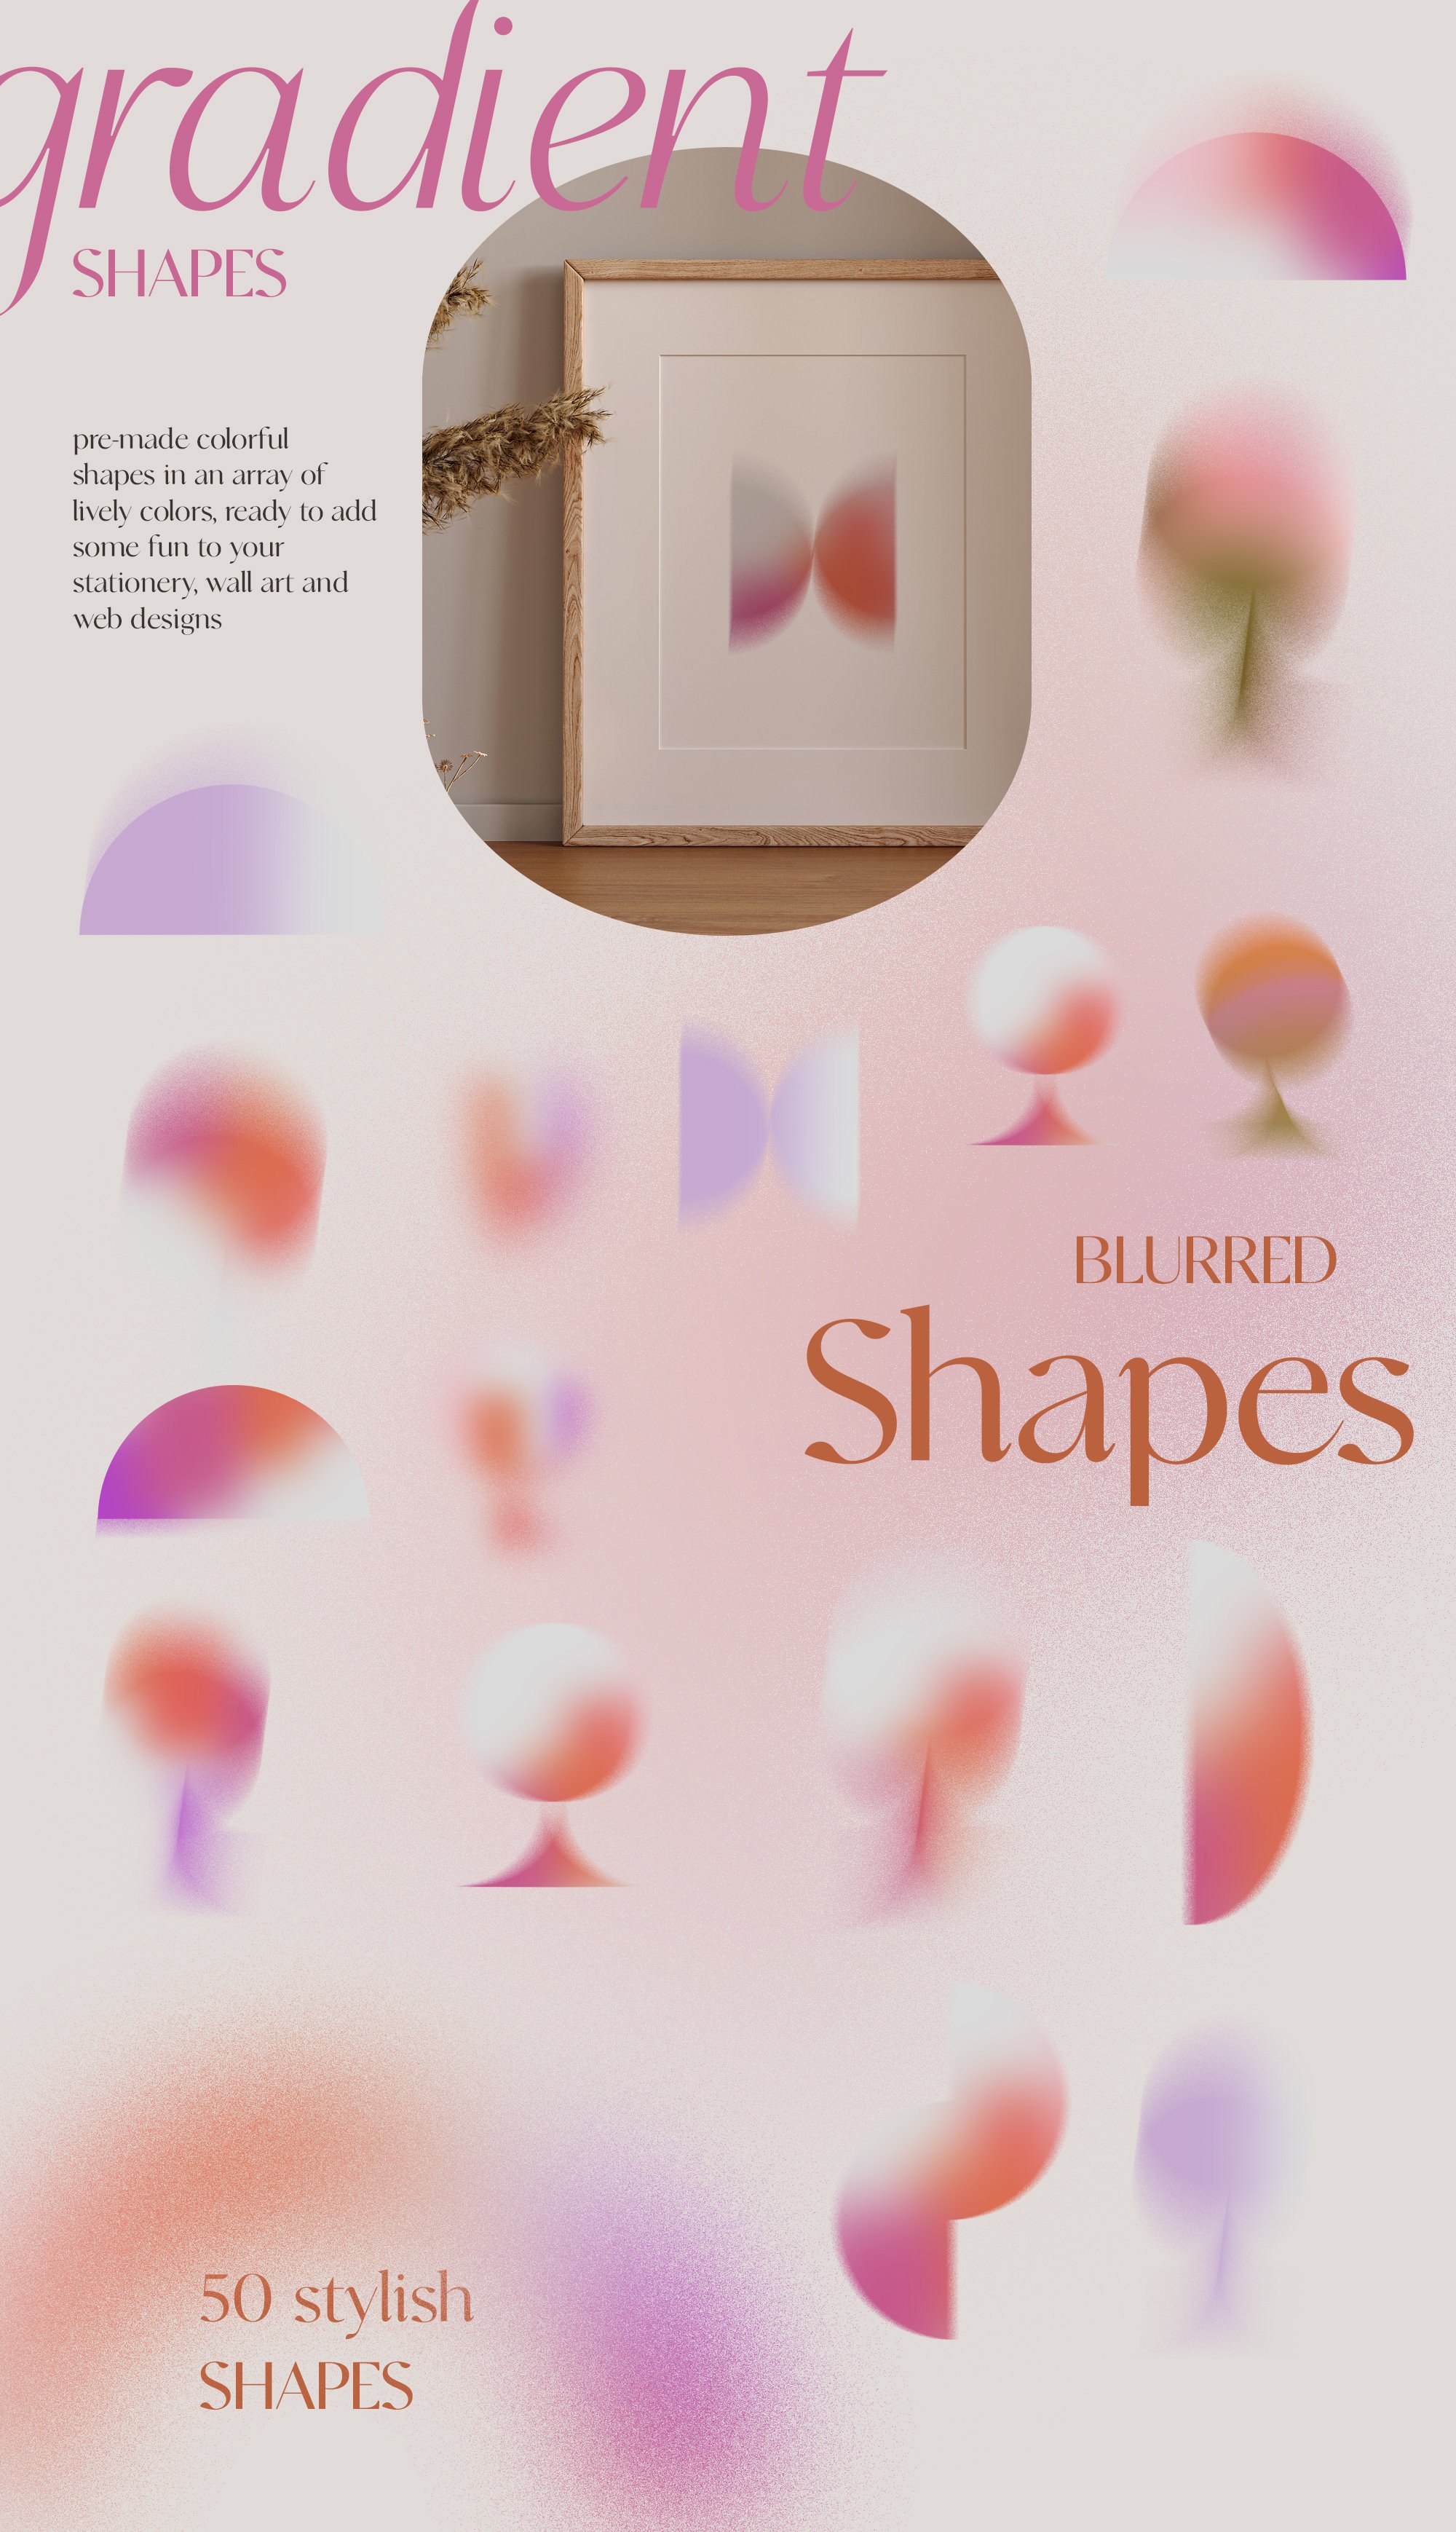 gradient-abstract-shapes-overview-